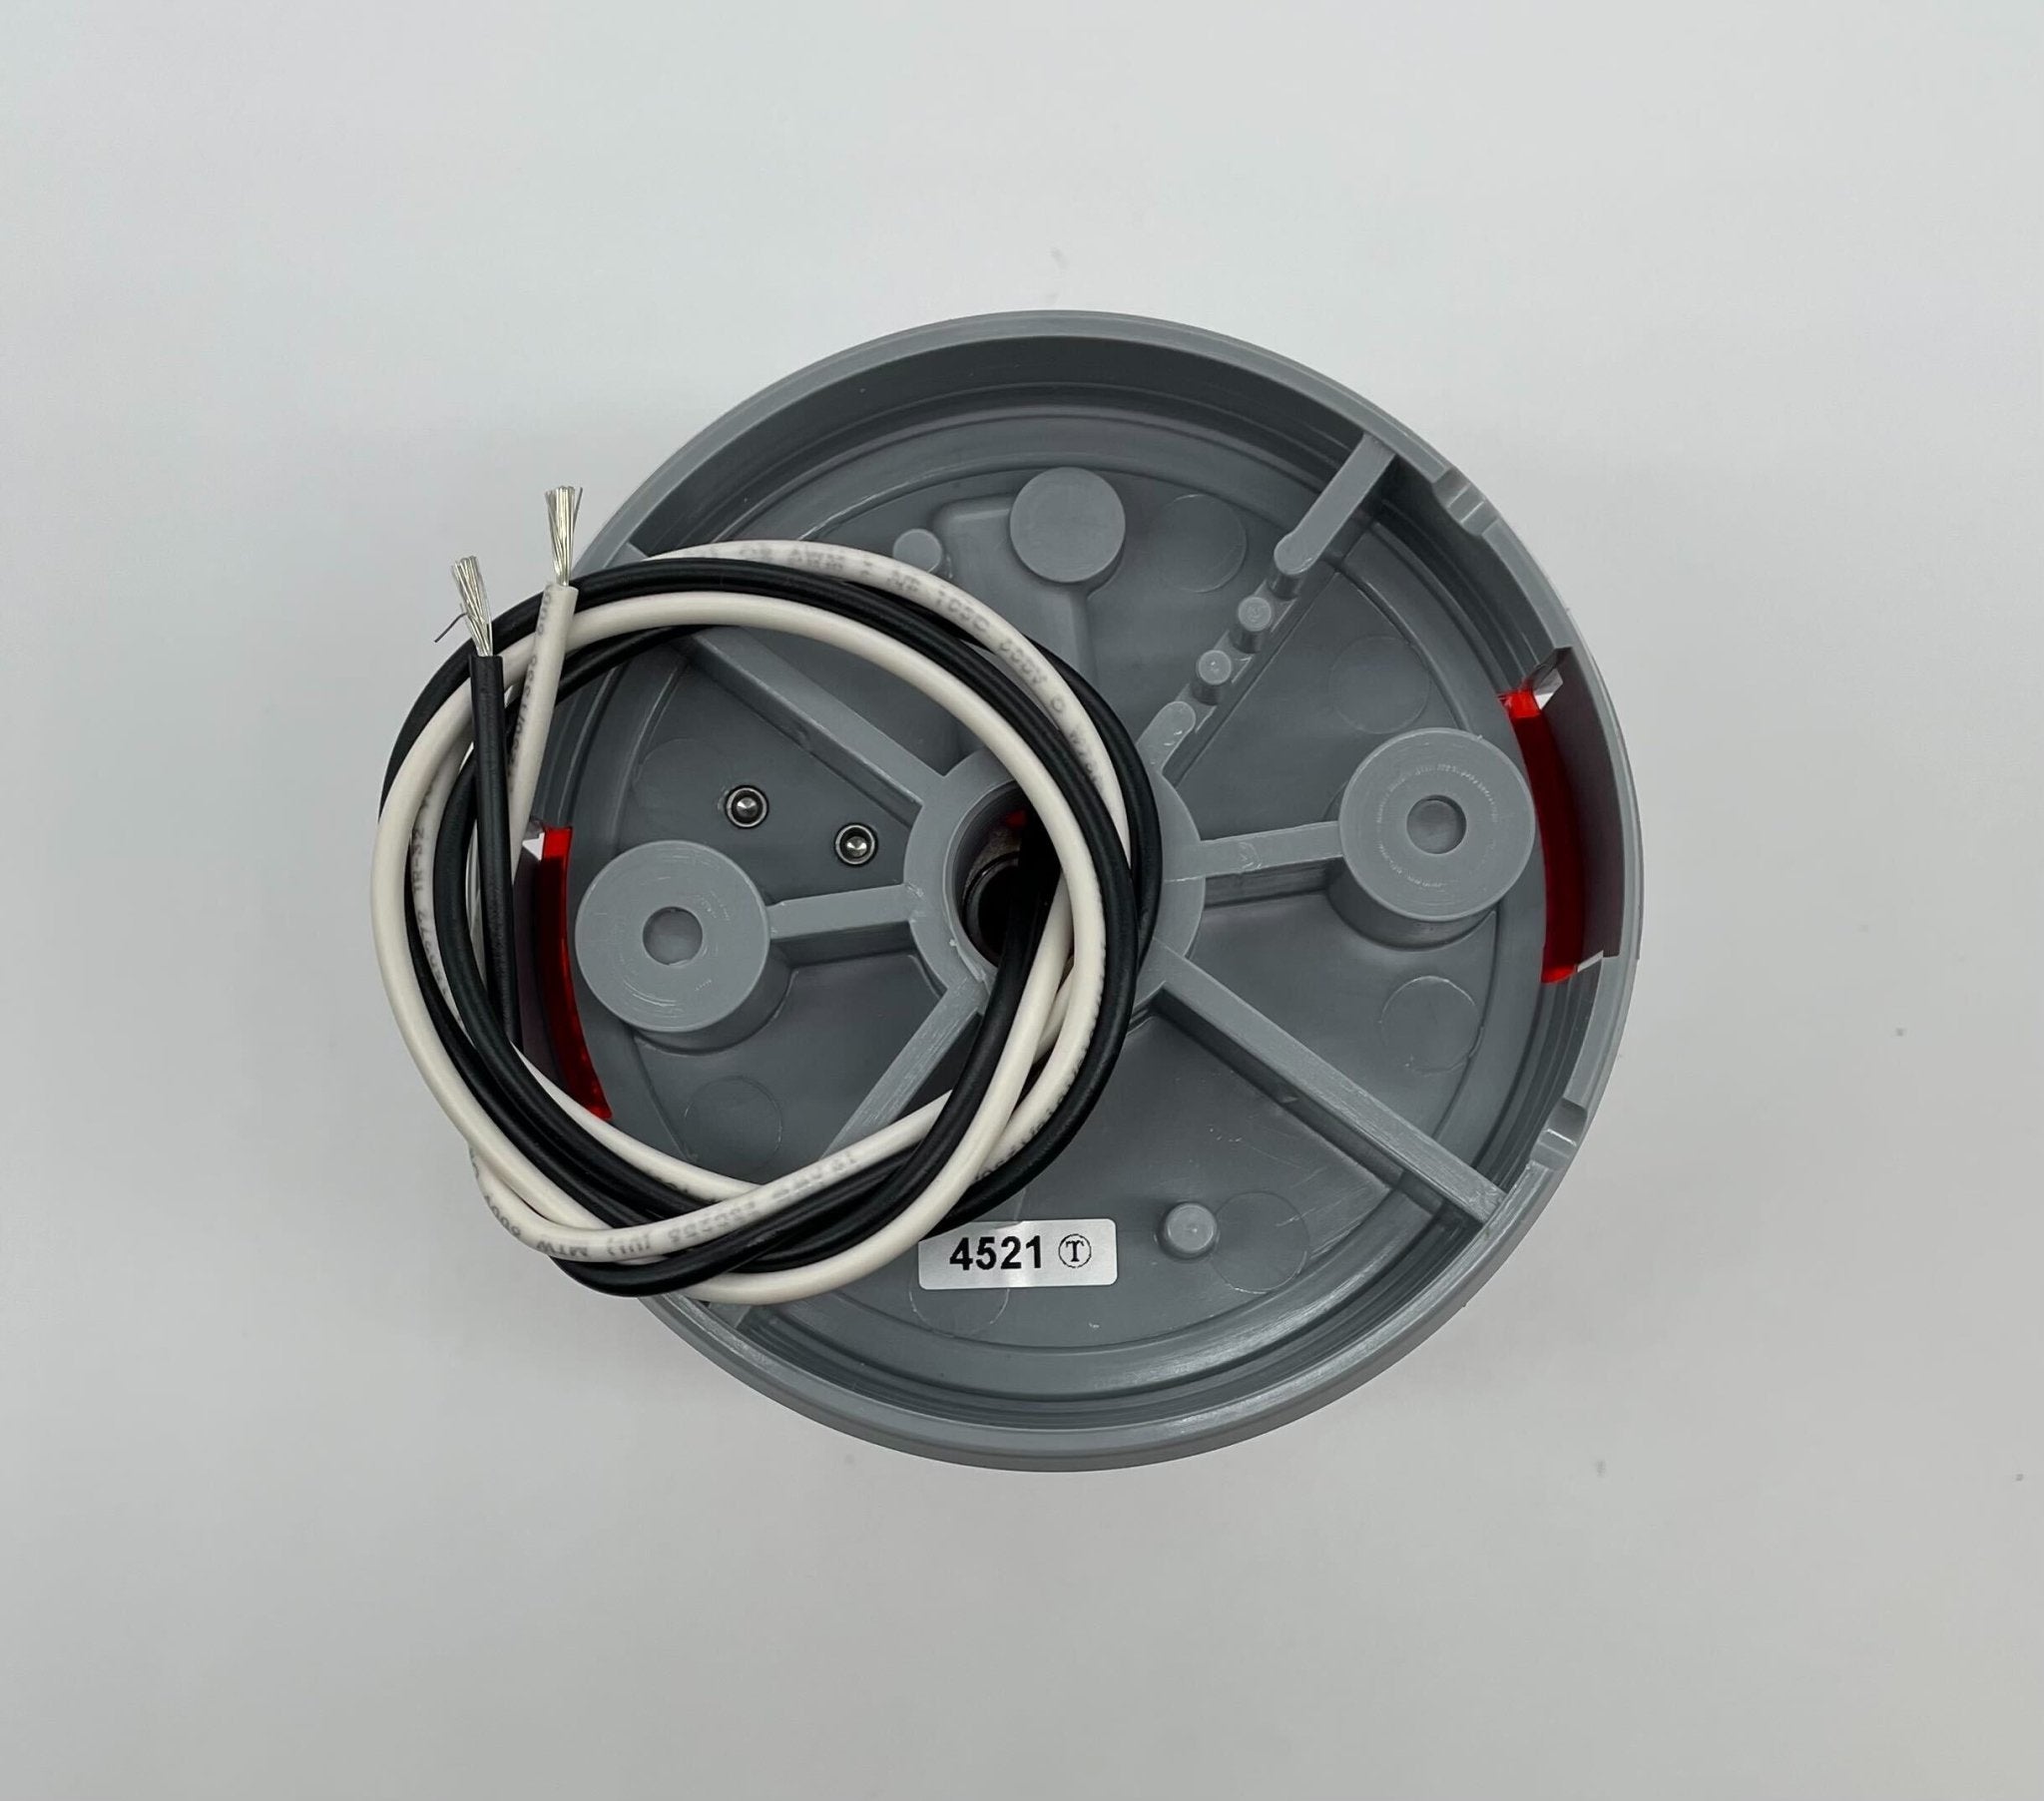 Edwards 48SINR-N5-25WH - The Fire Alarm Supplier